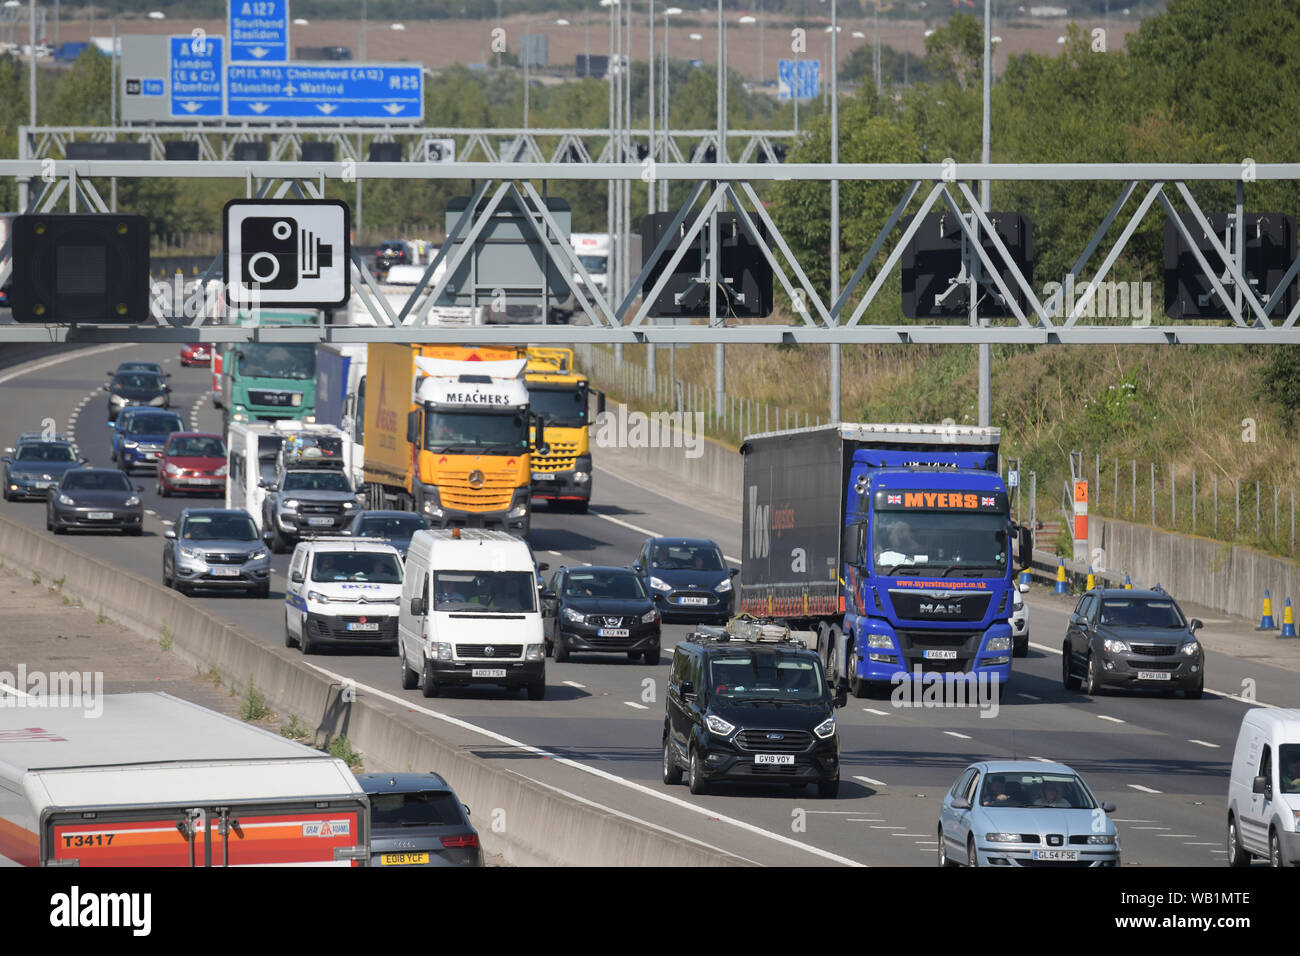 M25 Essex Heavy Bank Holiday Traffic heads towards the Dartford Crossing on one of the years busiest days on UK roads. Stock Photo